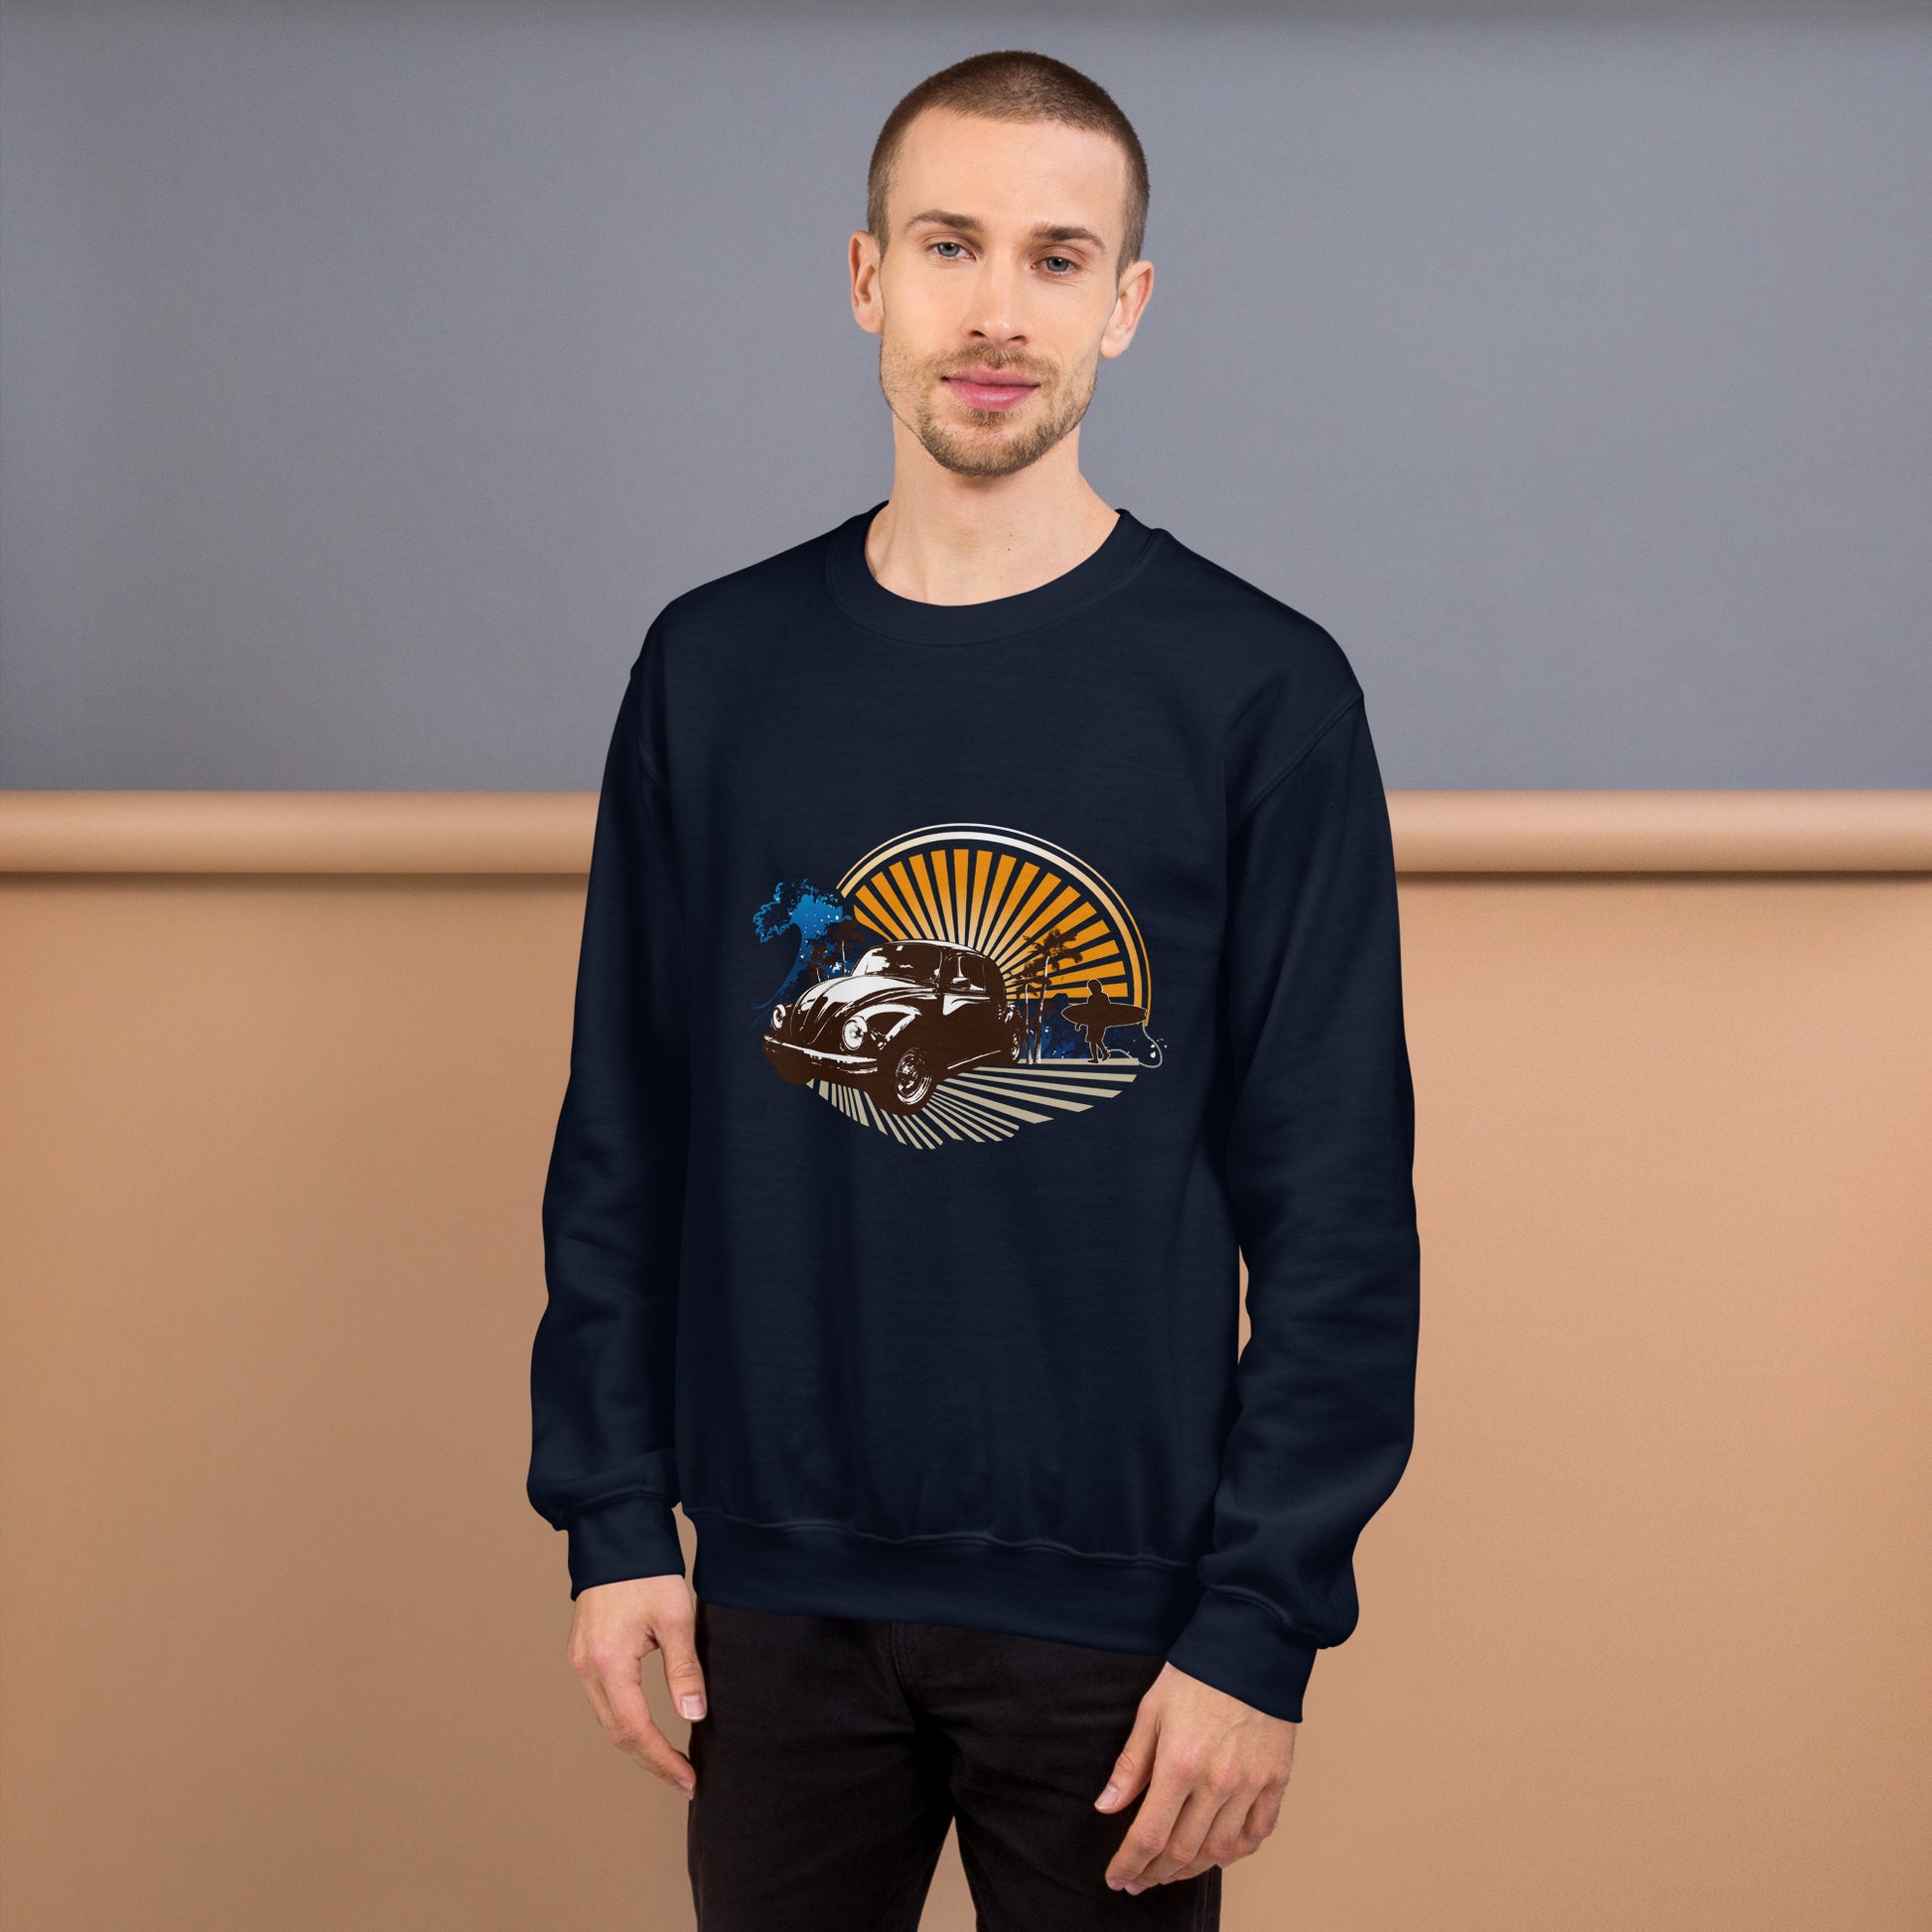 Men with navy blue sweatshirt with sunset and beetle car